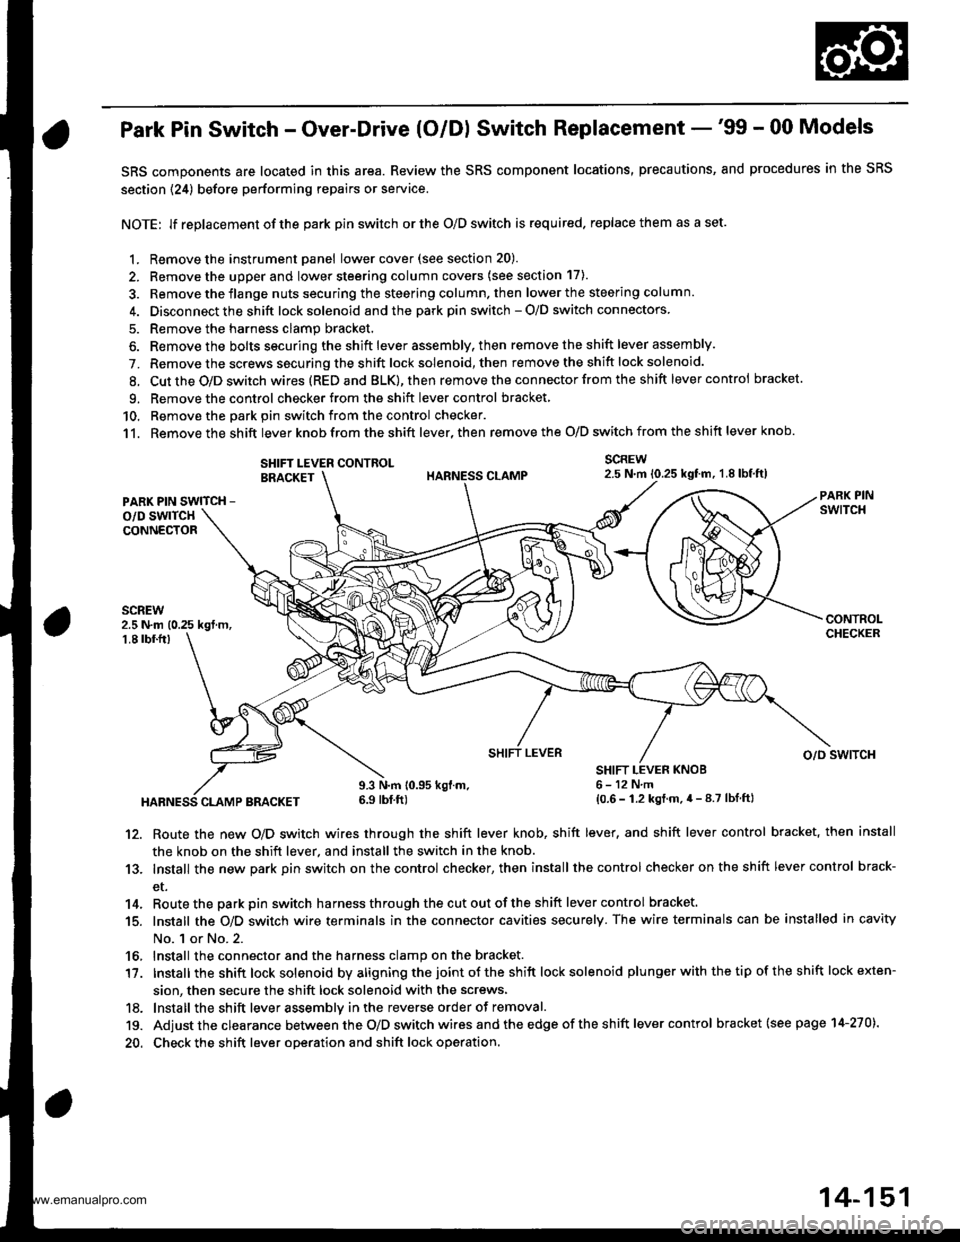 HONDA CR-V 1997 RD1-RD3 / 1.G Workshop Manual 
Park Pin Switch - Over-Drive (O/Dl Switch Replacement -99 - 00 Models
SRS components are located in this area. Review the SRS component locations, precautions, and procedures in the SRS
section {24)